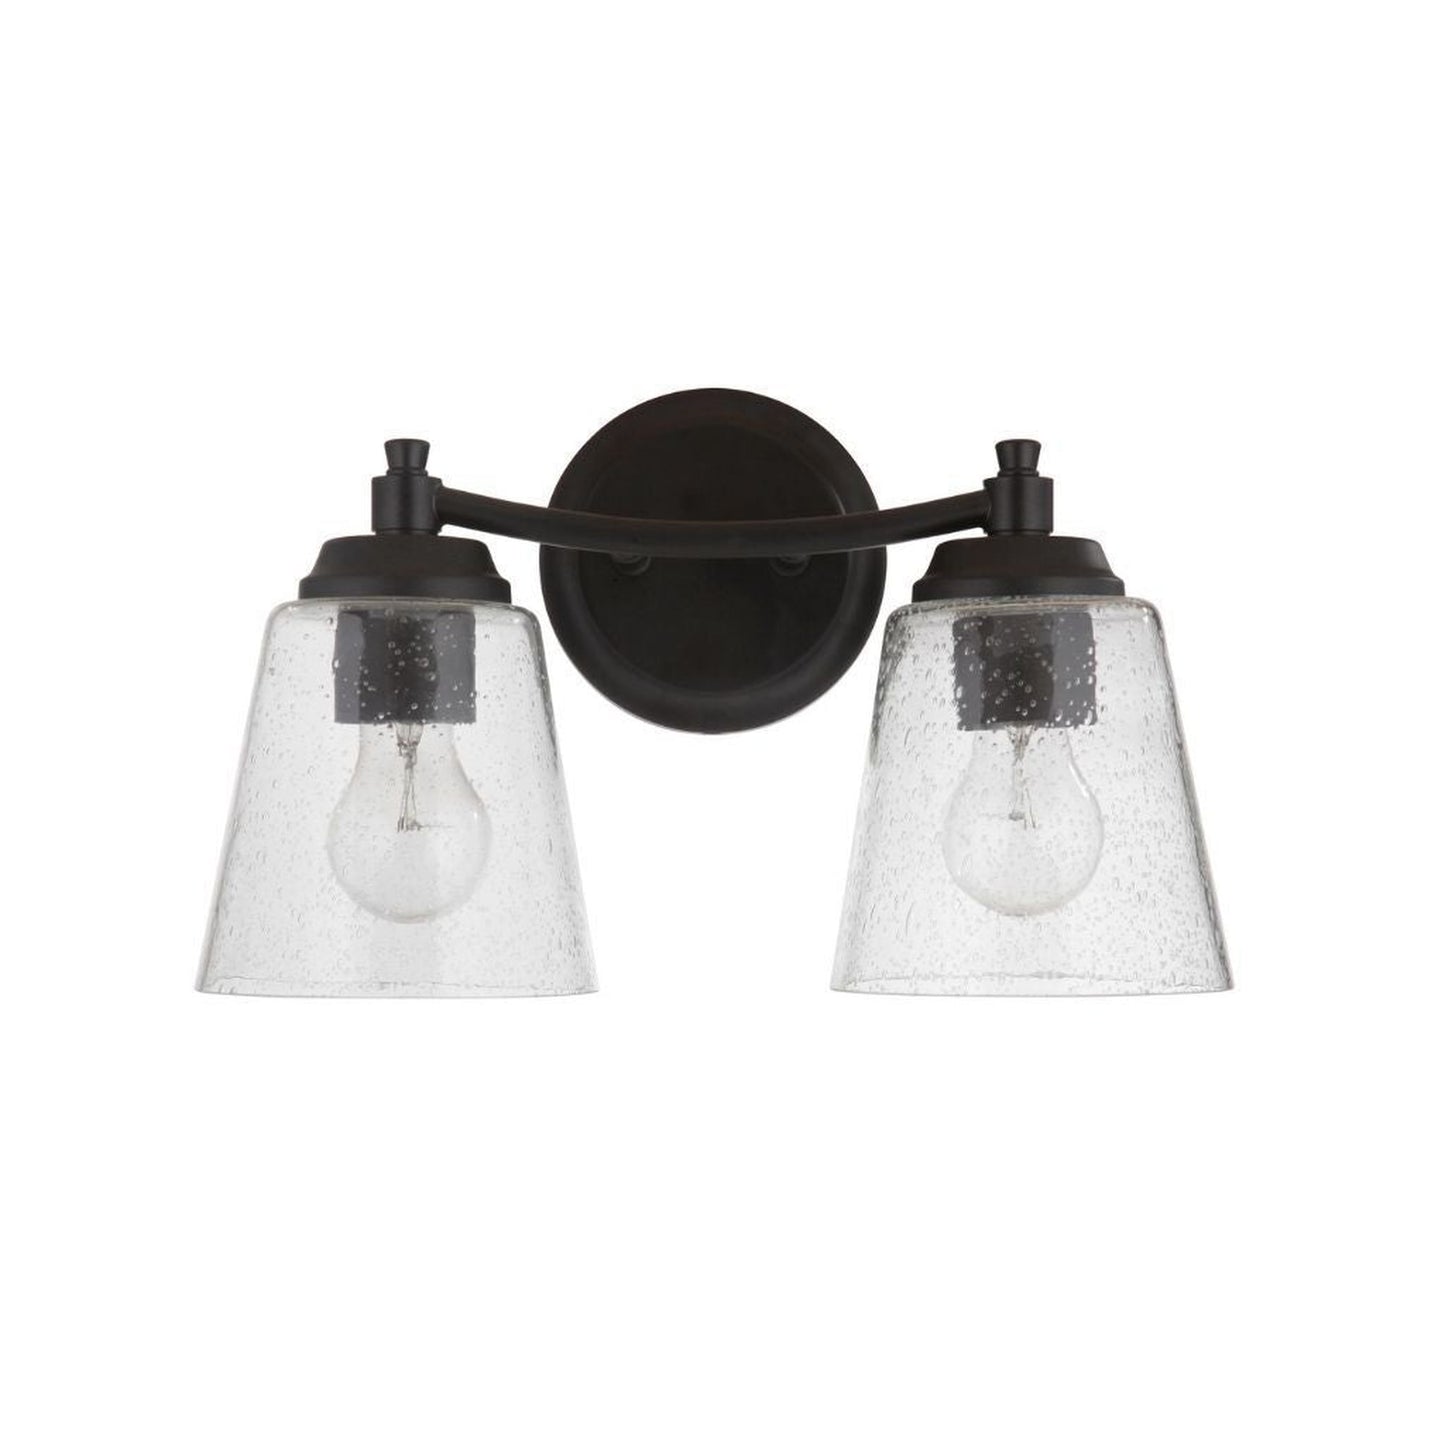 Craftmade Tyler 14" 2-Light FLat Black Vanity Light With Clear Seeded Glass Shades